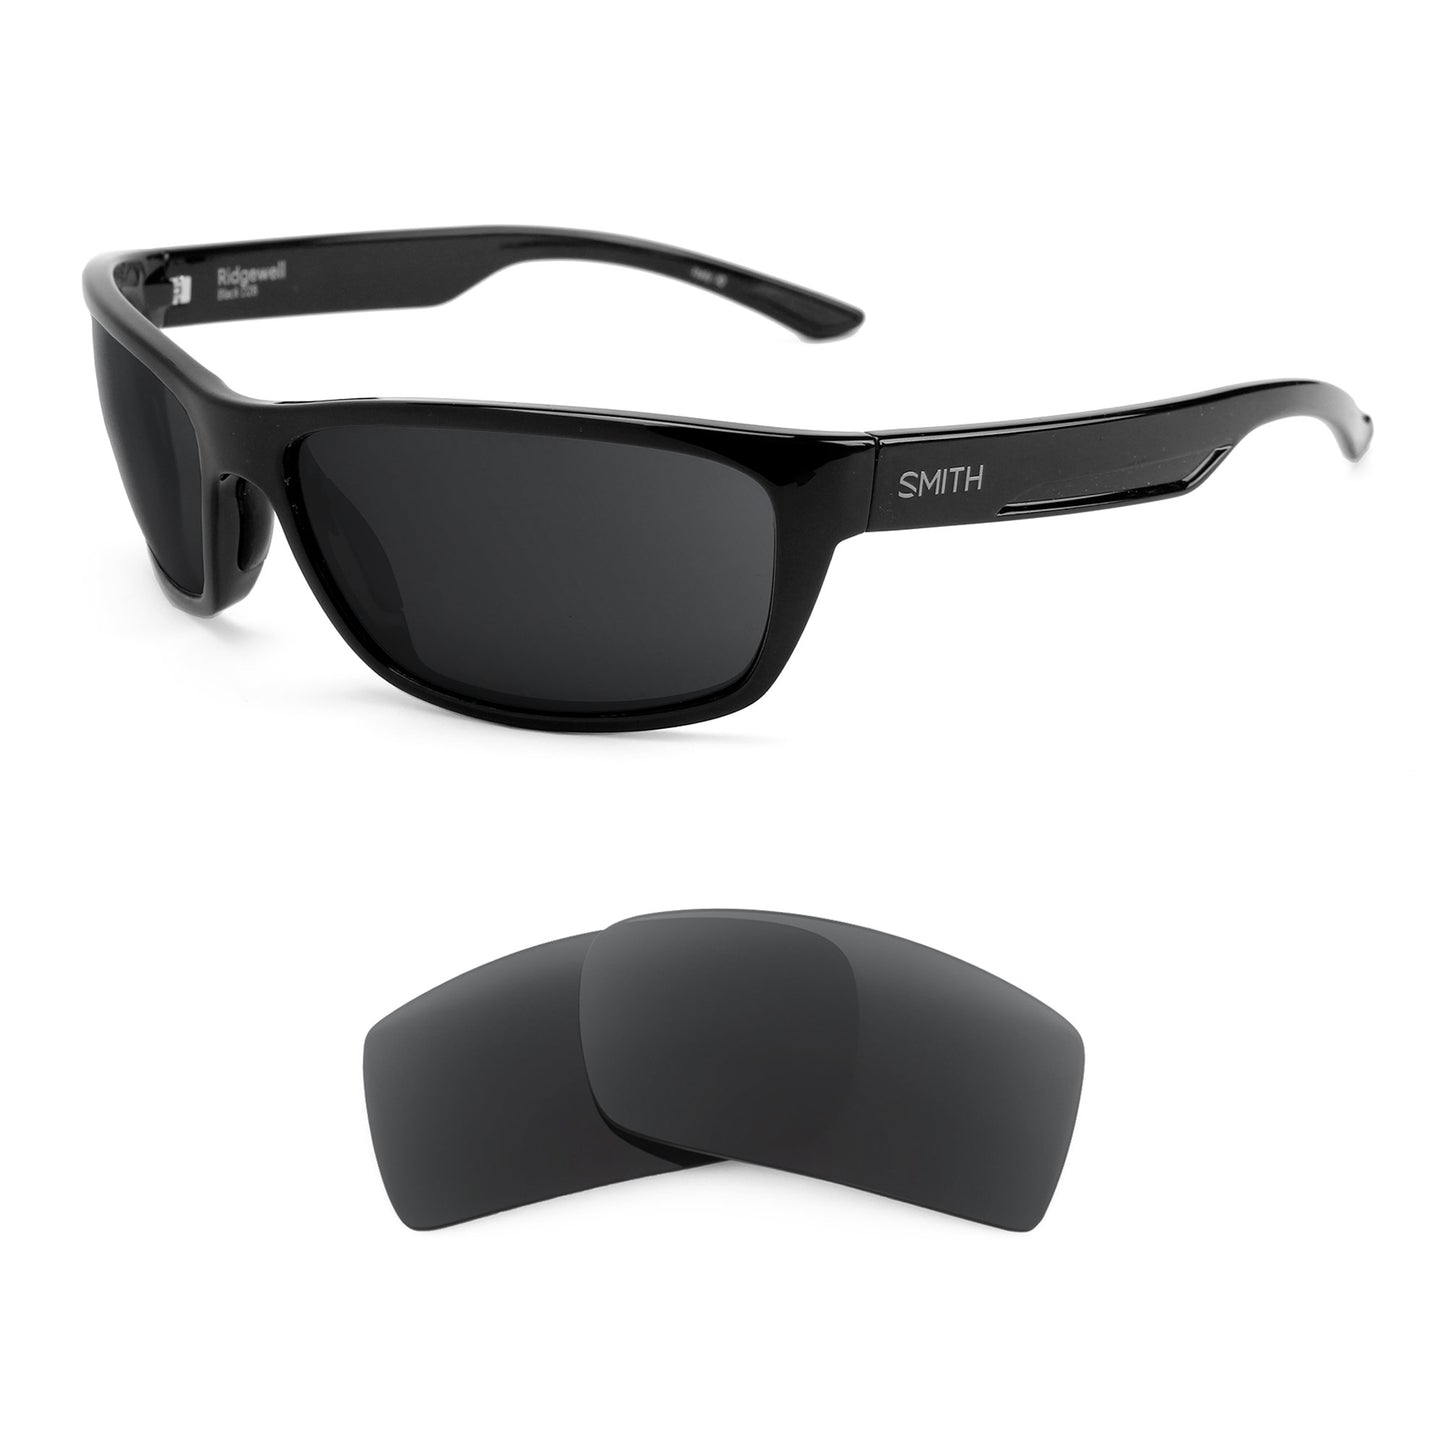 Smith Ridgewell sunglasses with replacement lenses